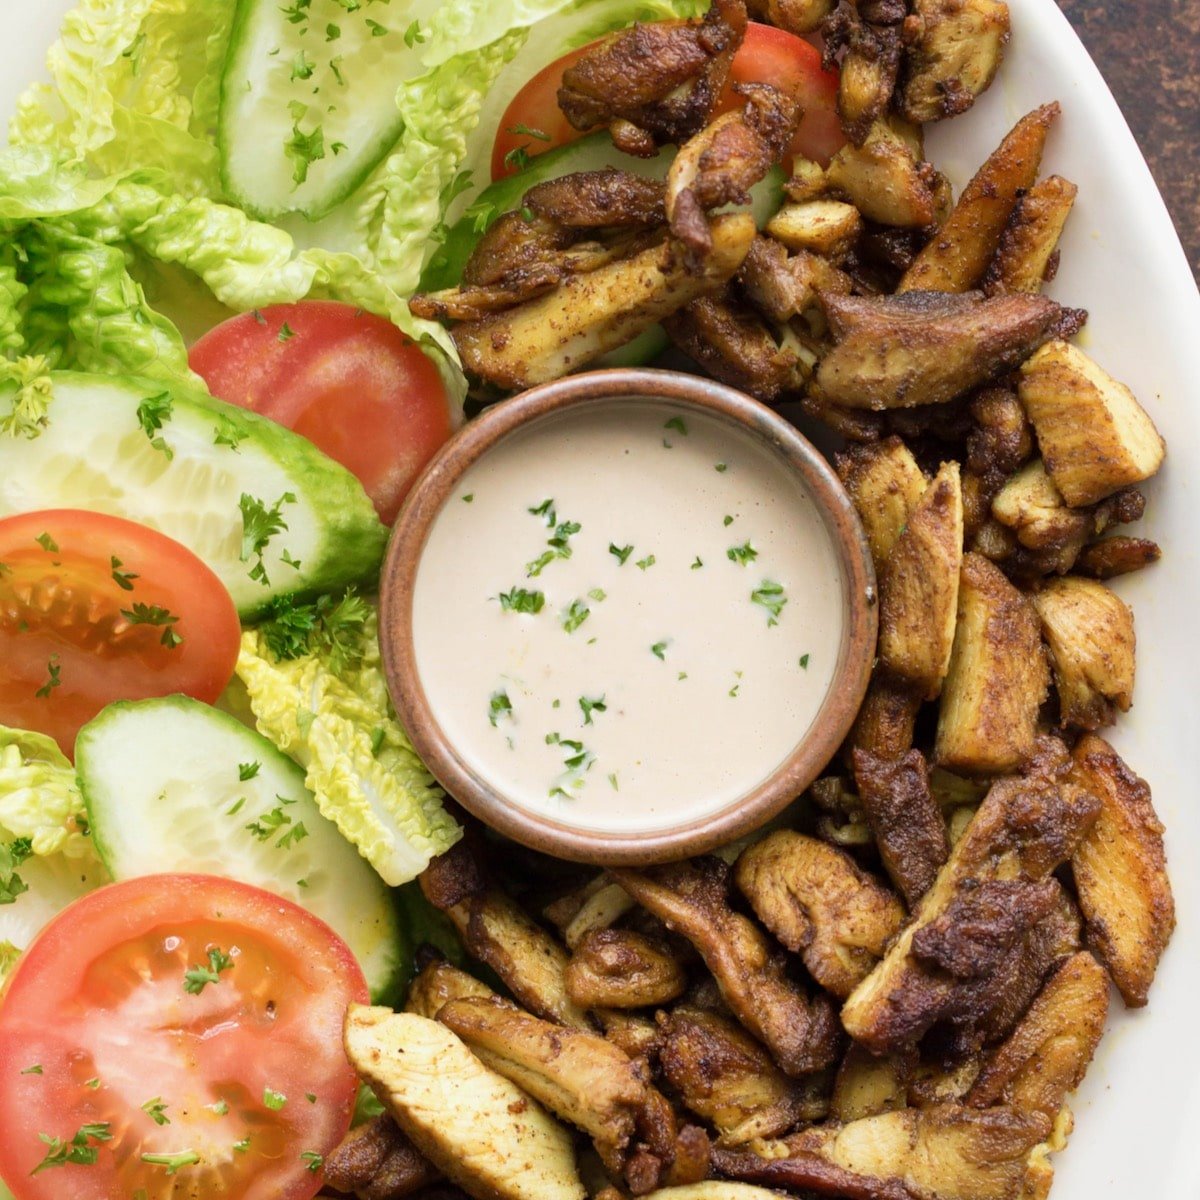 Square crop featured image - white platter of chicken shawarma with fresh lettuce and tomato, small dish of tahini in center garnished with sprinkle of parsley